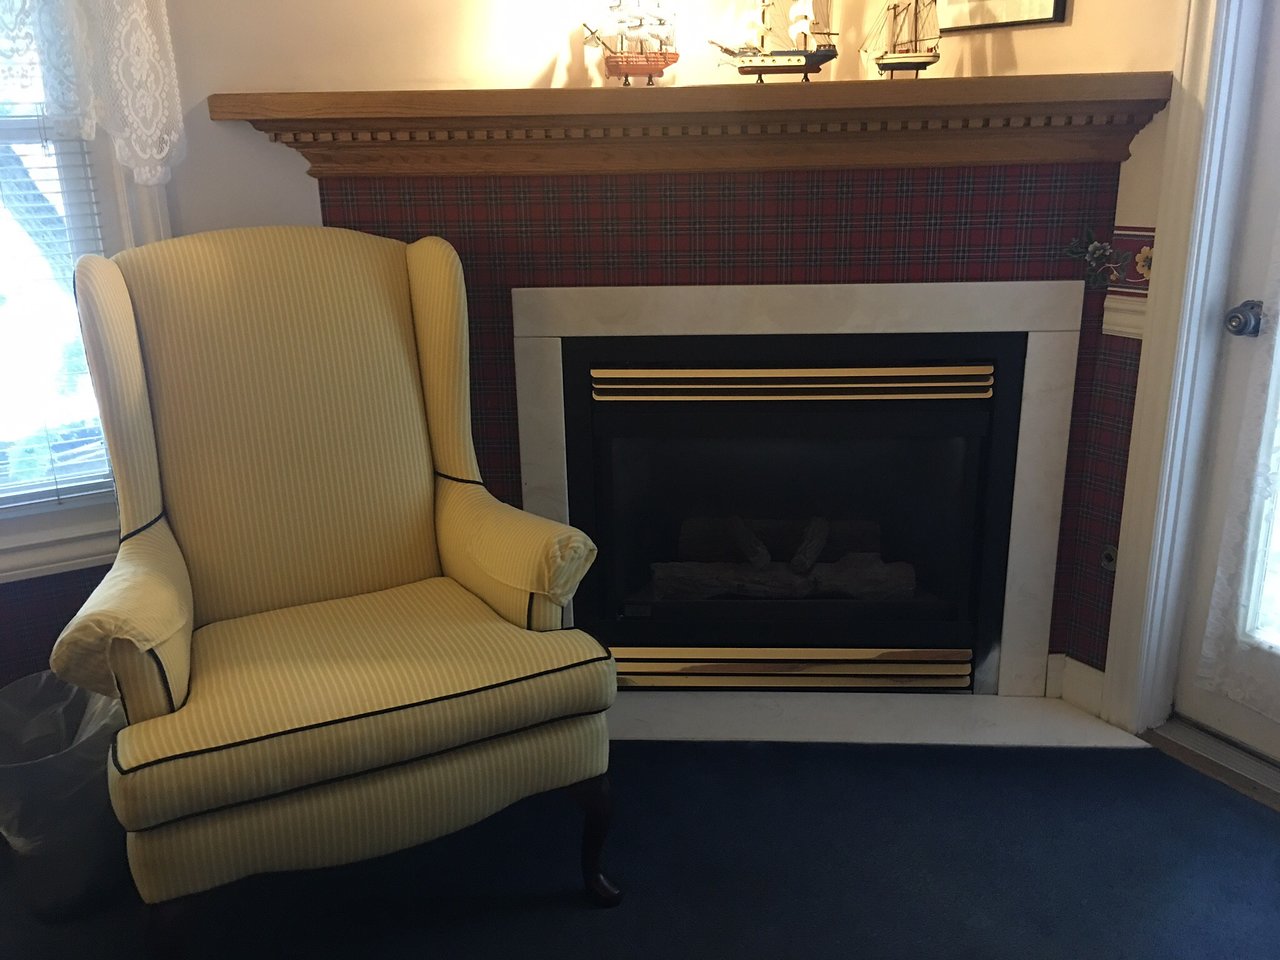 South Shore Fireplace Awesome Carriage House at the Harbor Updated 2019 B&b Reviews